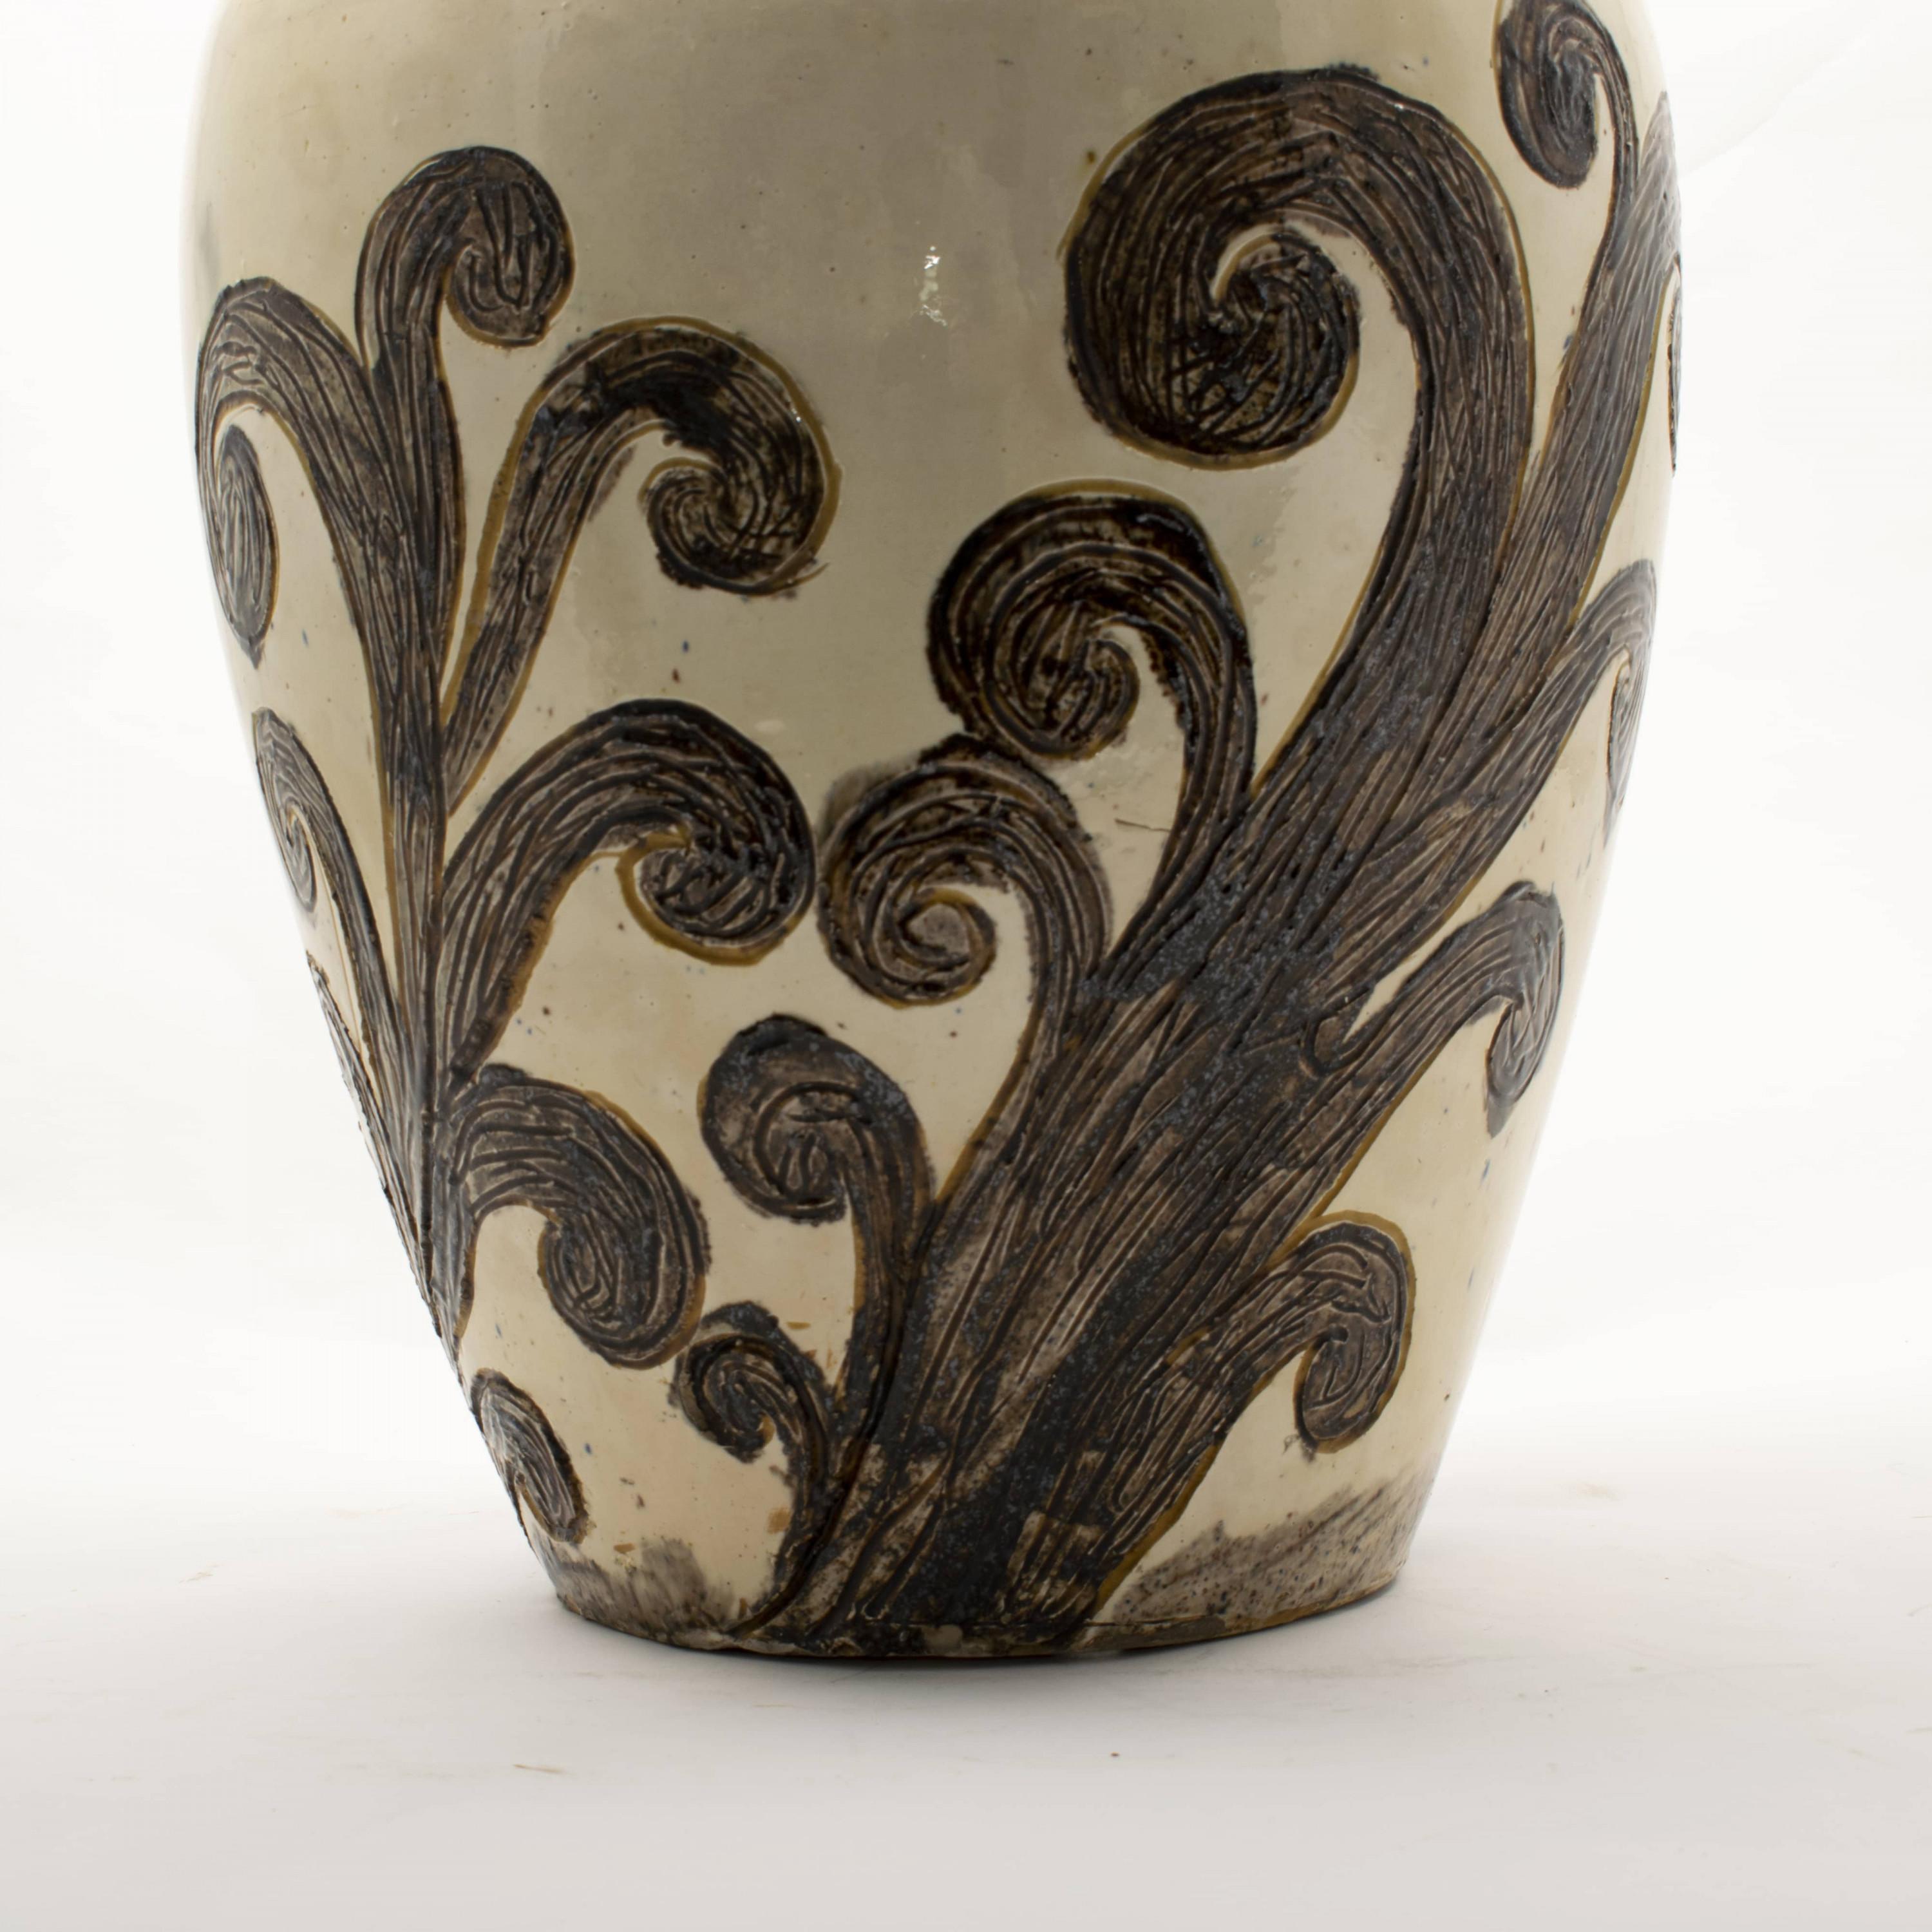 Thorvald Bindesbøll, Large One of a Kind Ceramic Vase with Organic Motifs In Good Condition For Sale In Kastrup, DK